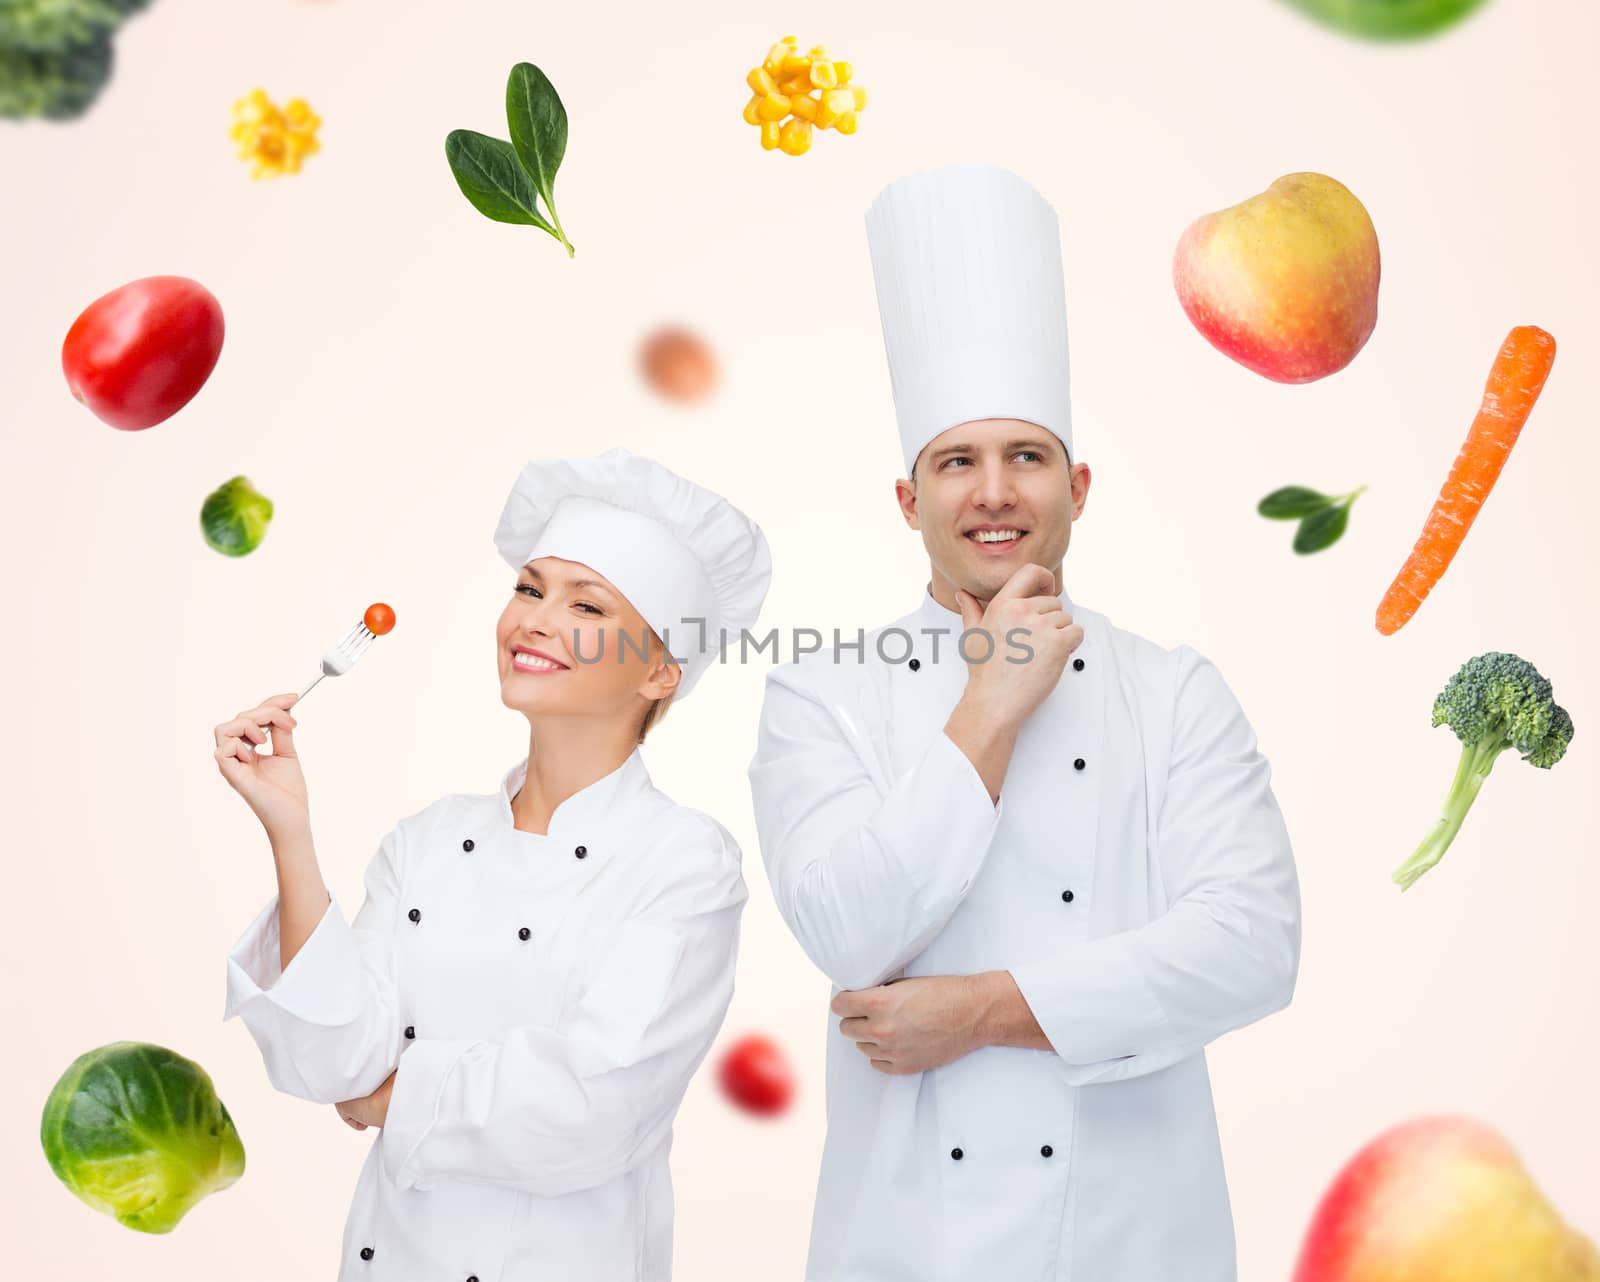 cooking, profession, inspiration, vegetarian diet and people concept - happy chef couple or cooks eating and thinking over beige background with falling vegetables